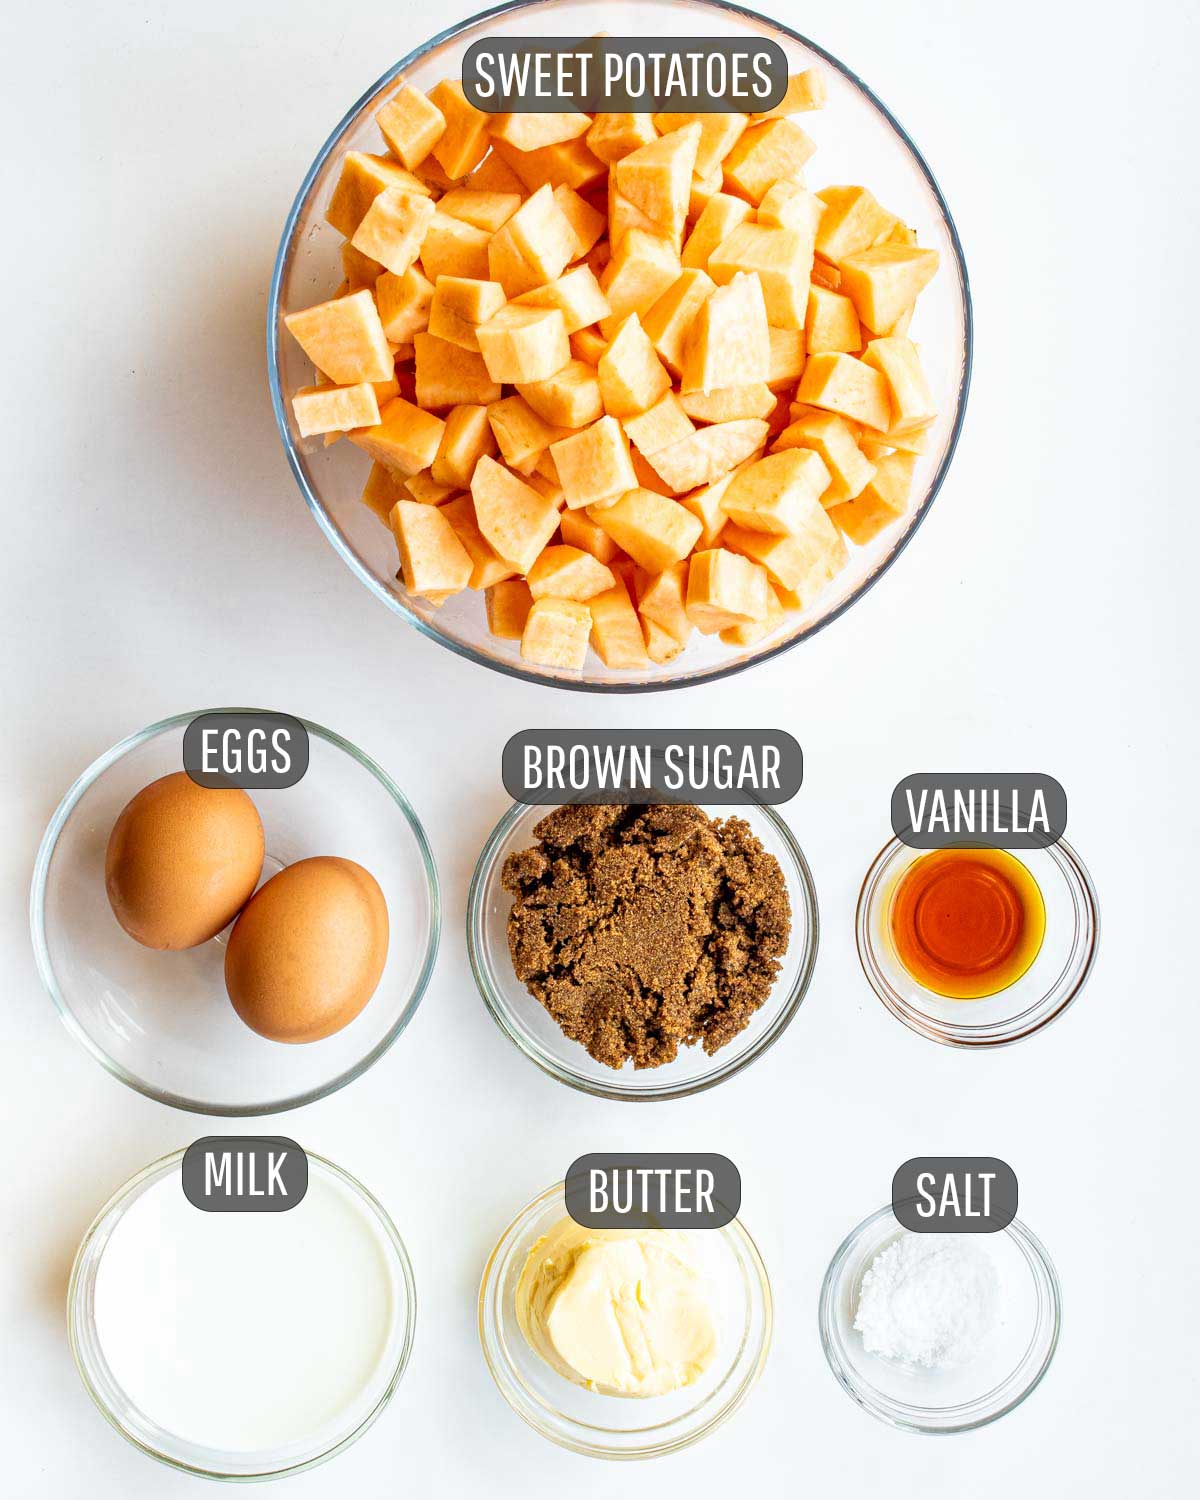 ingredients needed to make sweet potato casserole filling.